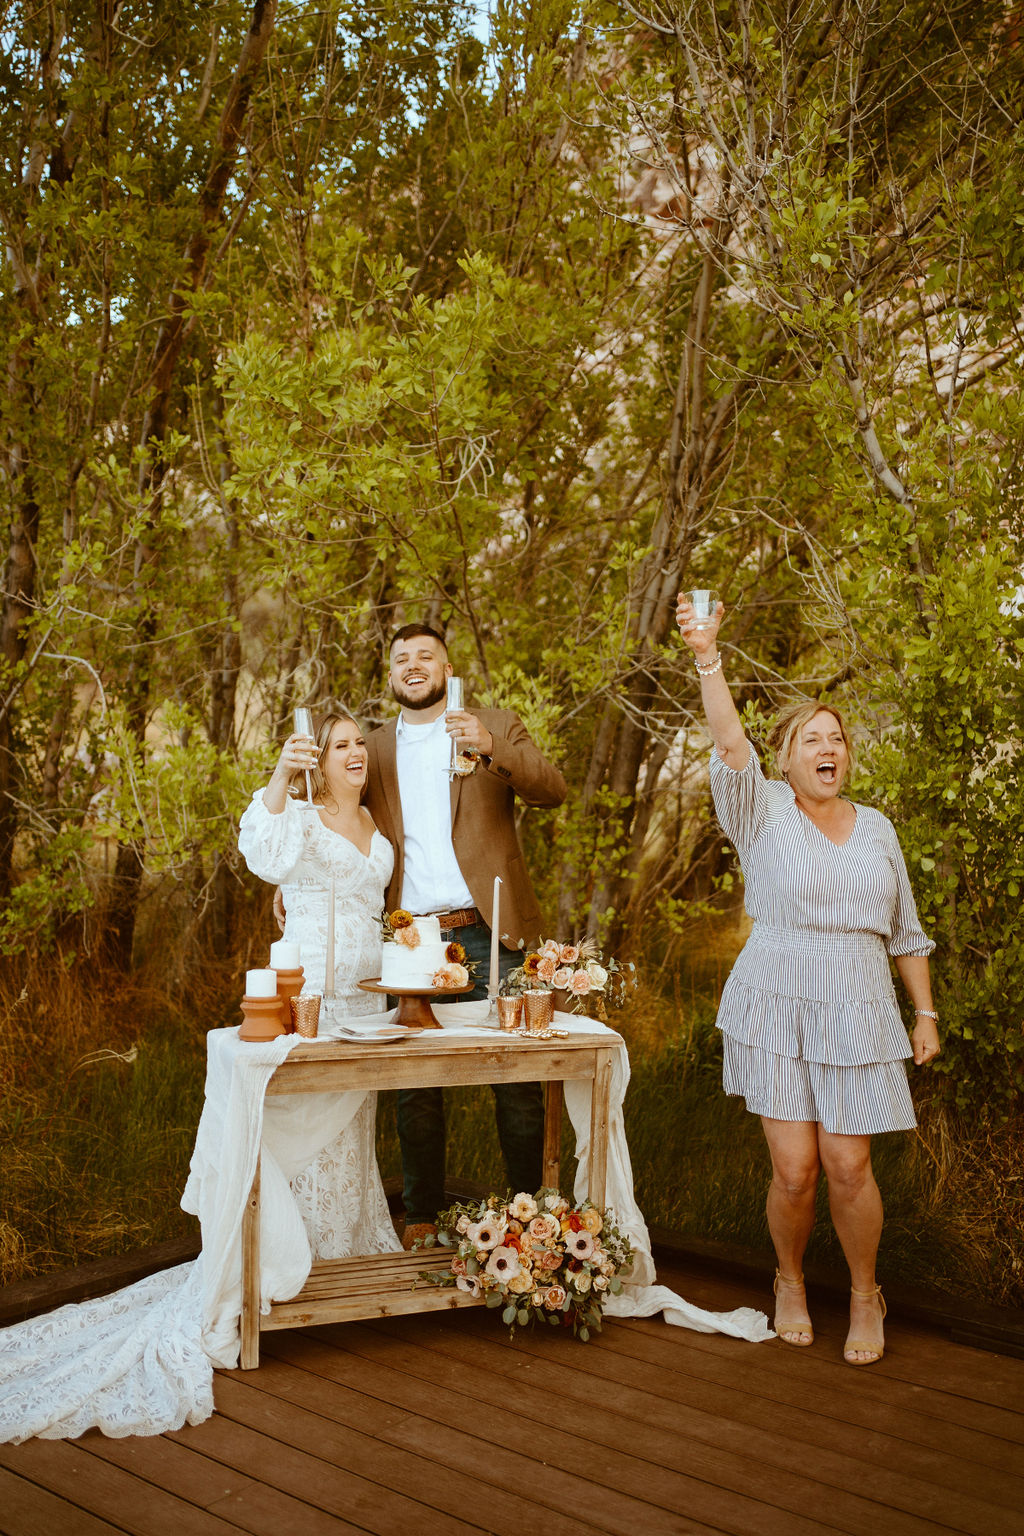 A wedding party guest standing next to the bride and groom at their cake table cheering excitedly with her glass way up in the air. The bride and groom laughing as they raise their glasses to cheer. 